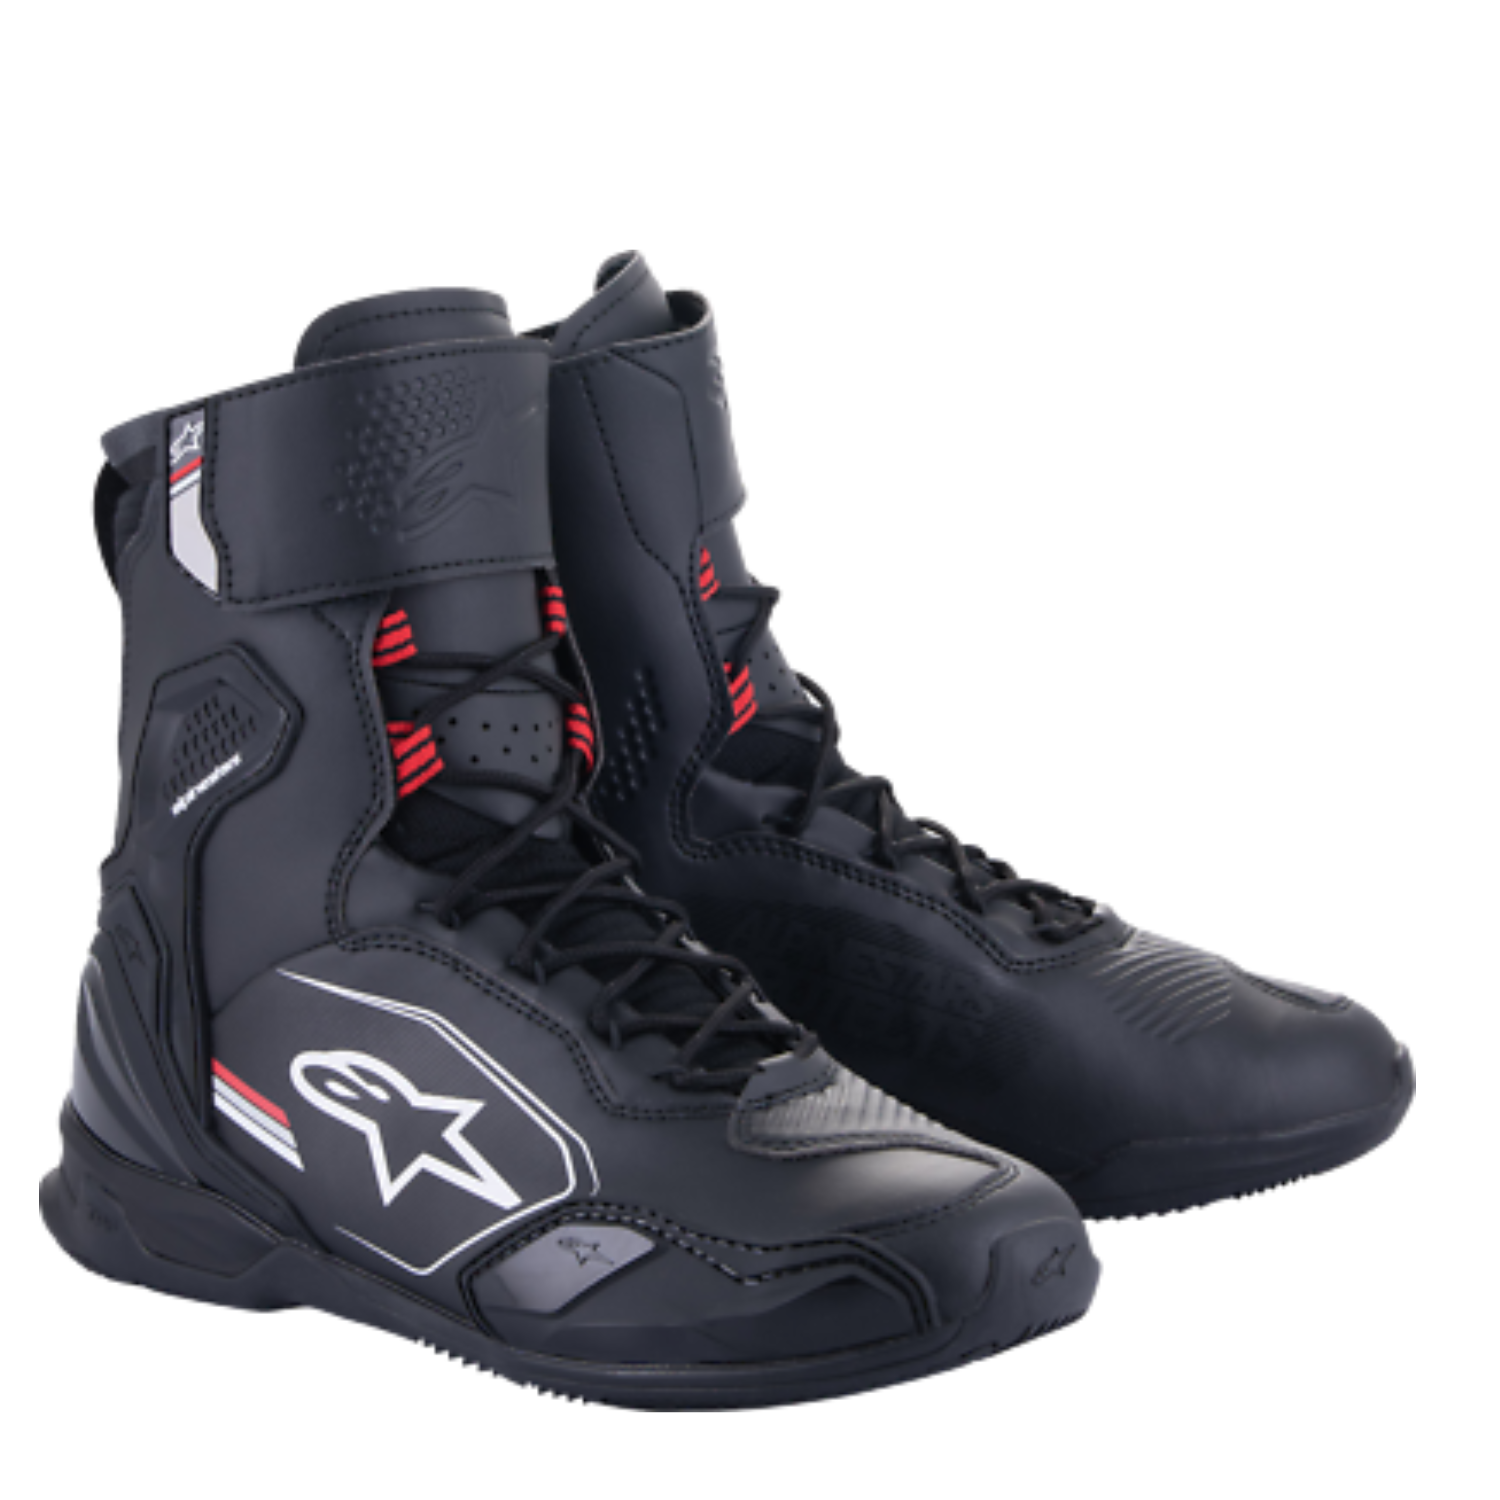 Image of Alpinestars Superfaster Shoes Black Gray Bright Red Size US 11 EN